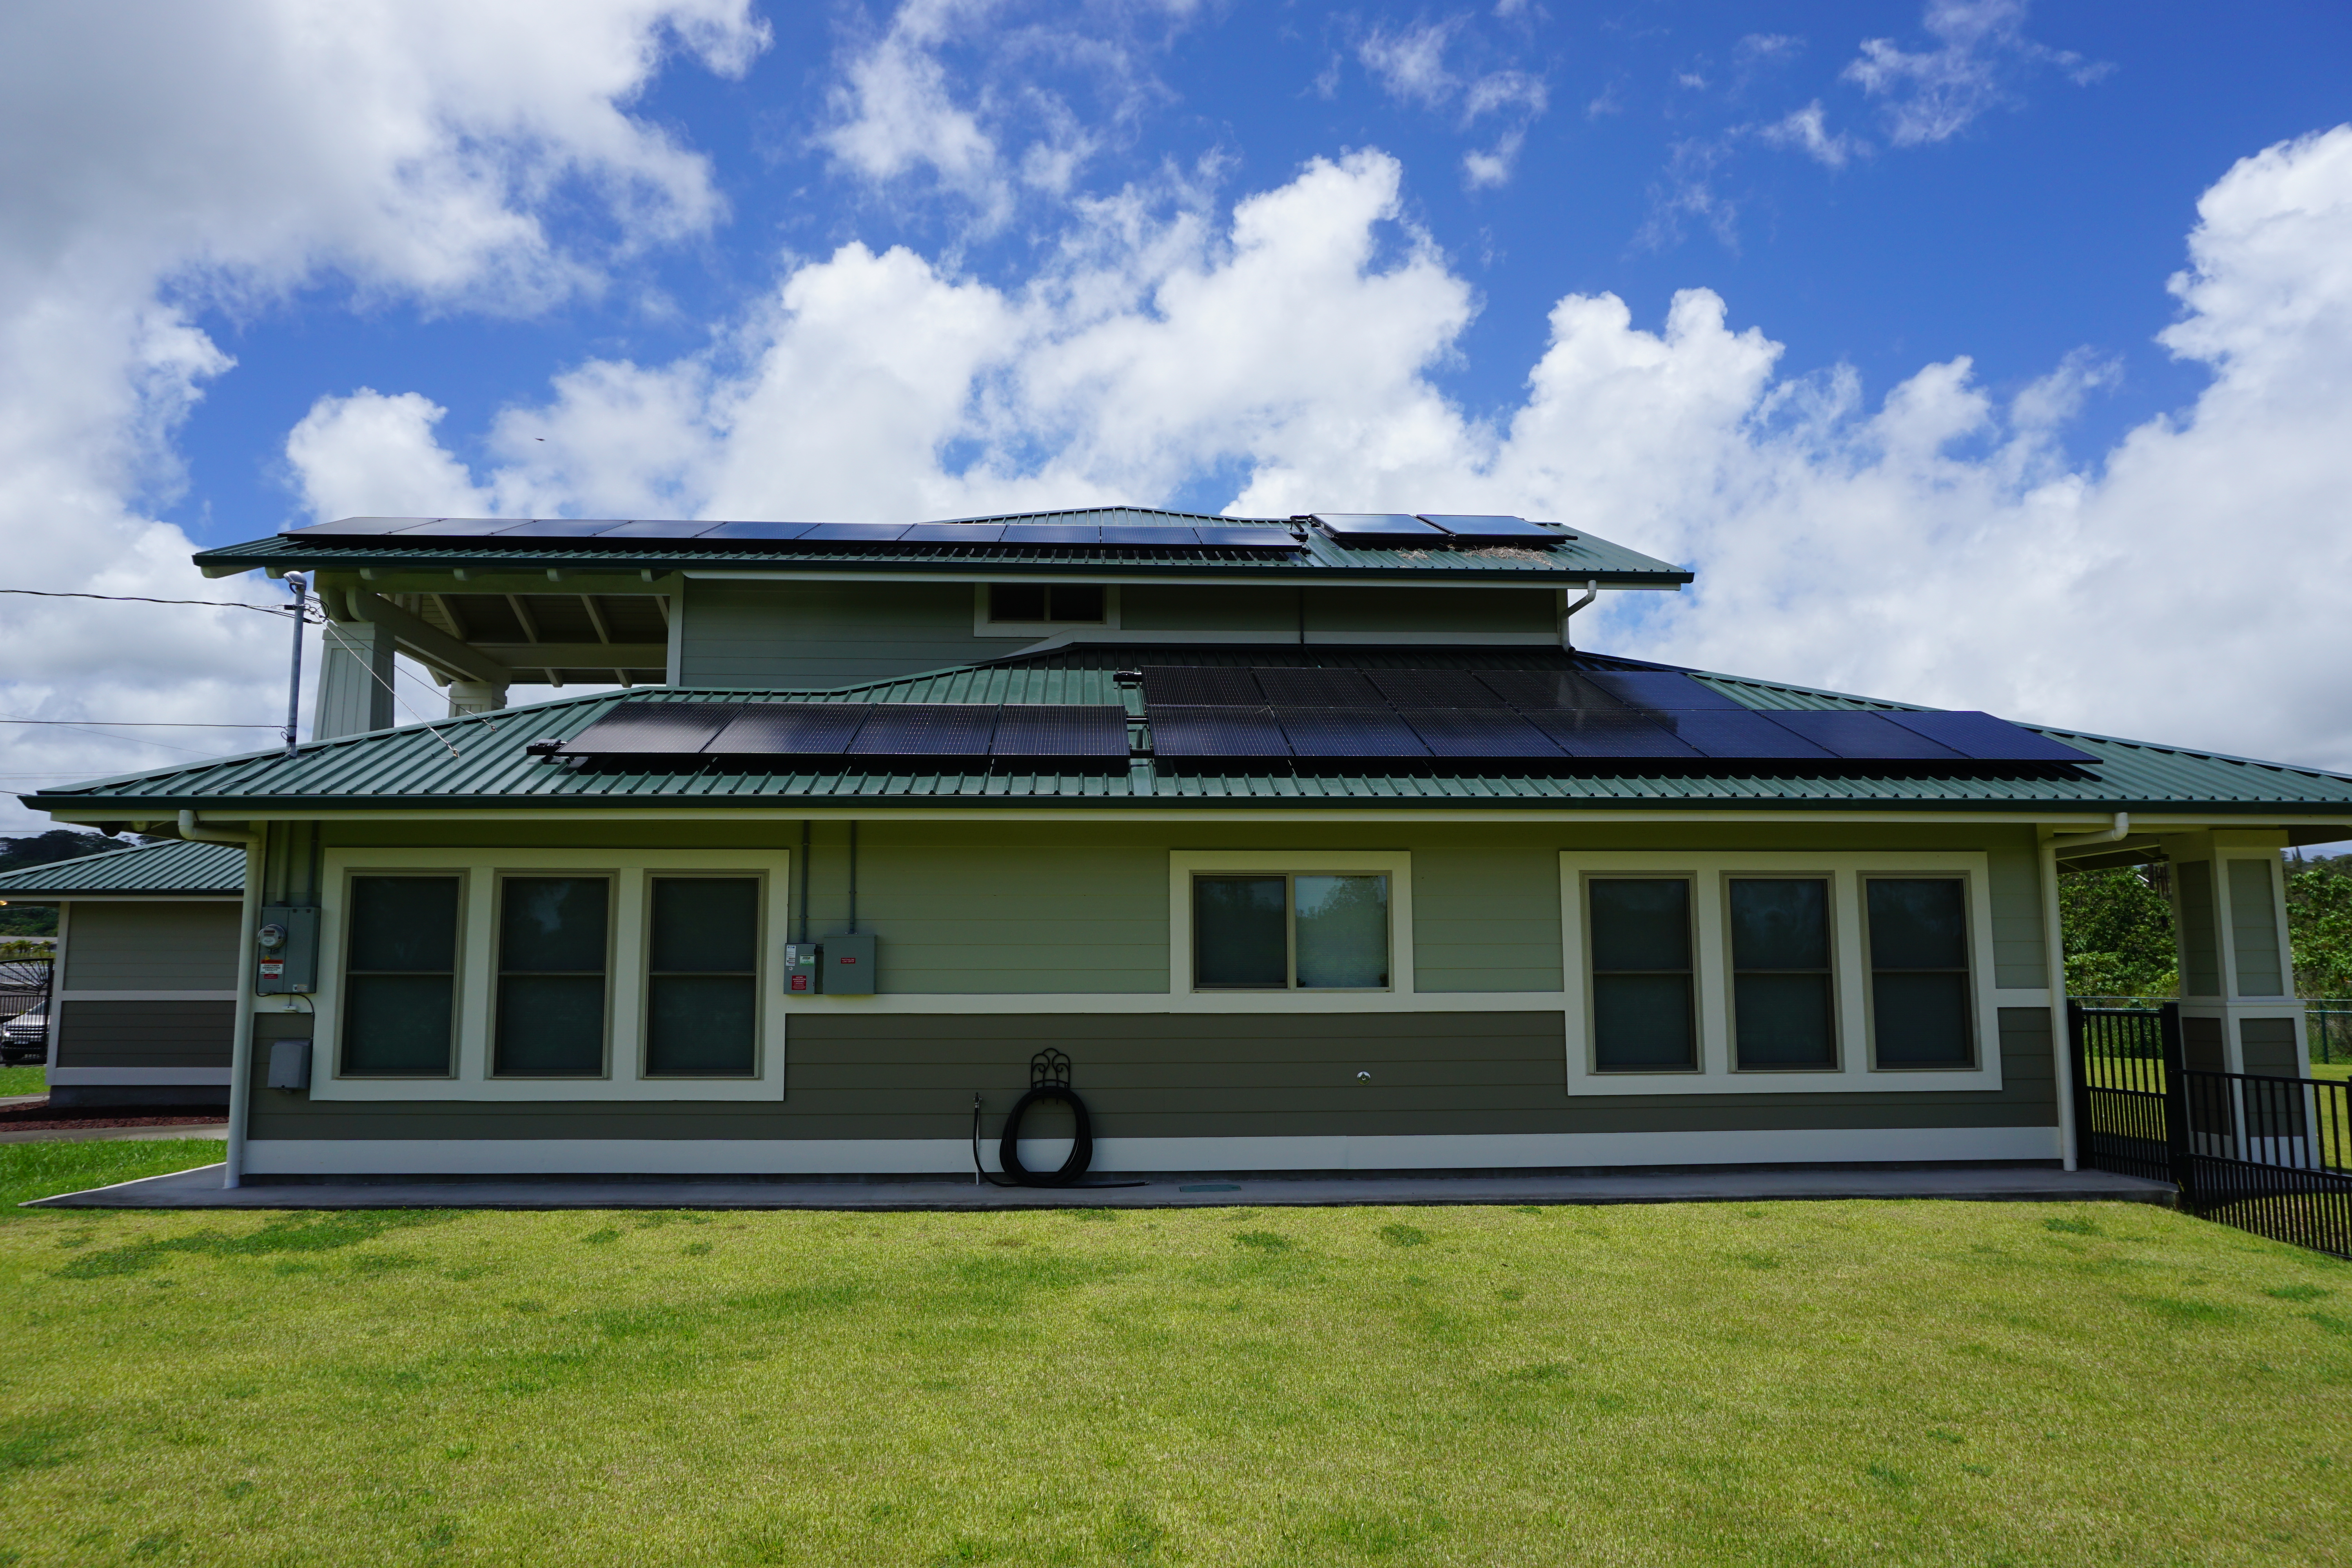 Solar panels for house in Hilo, Hawaii